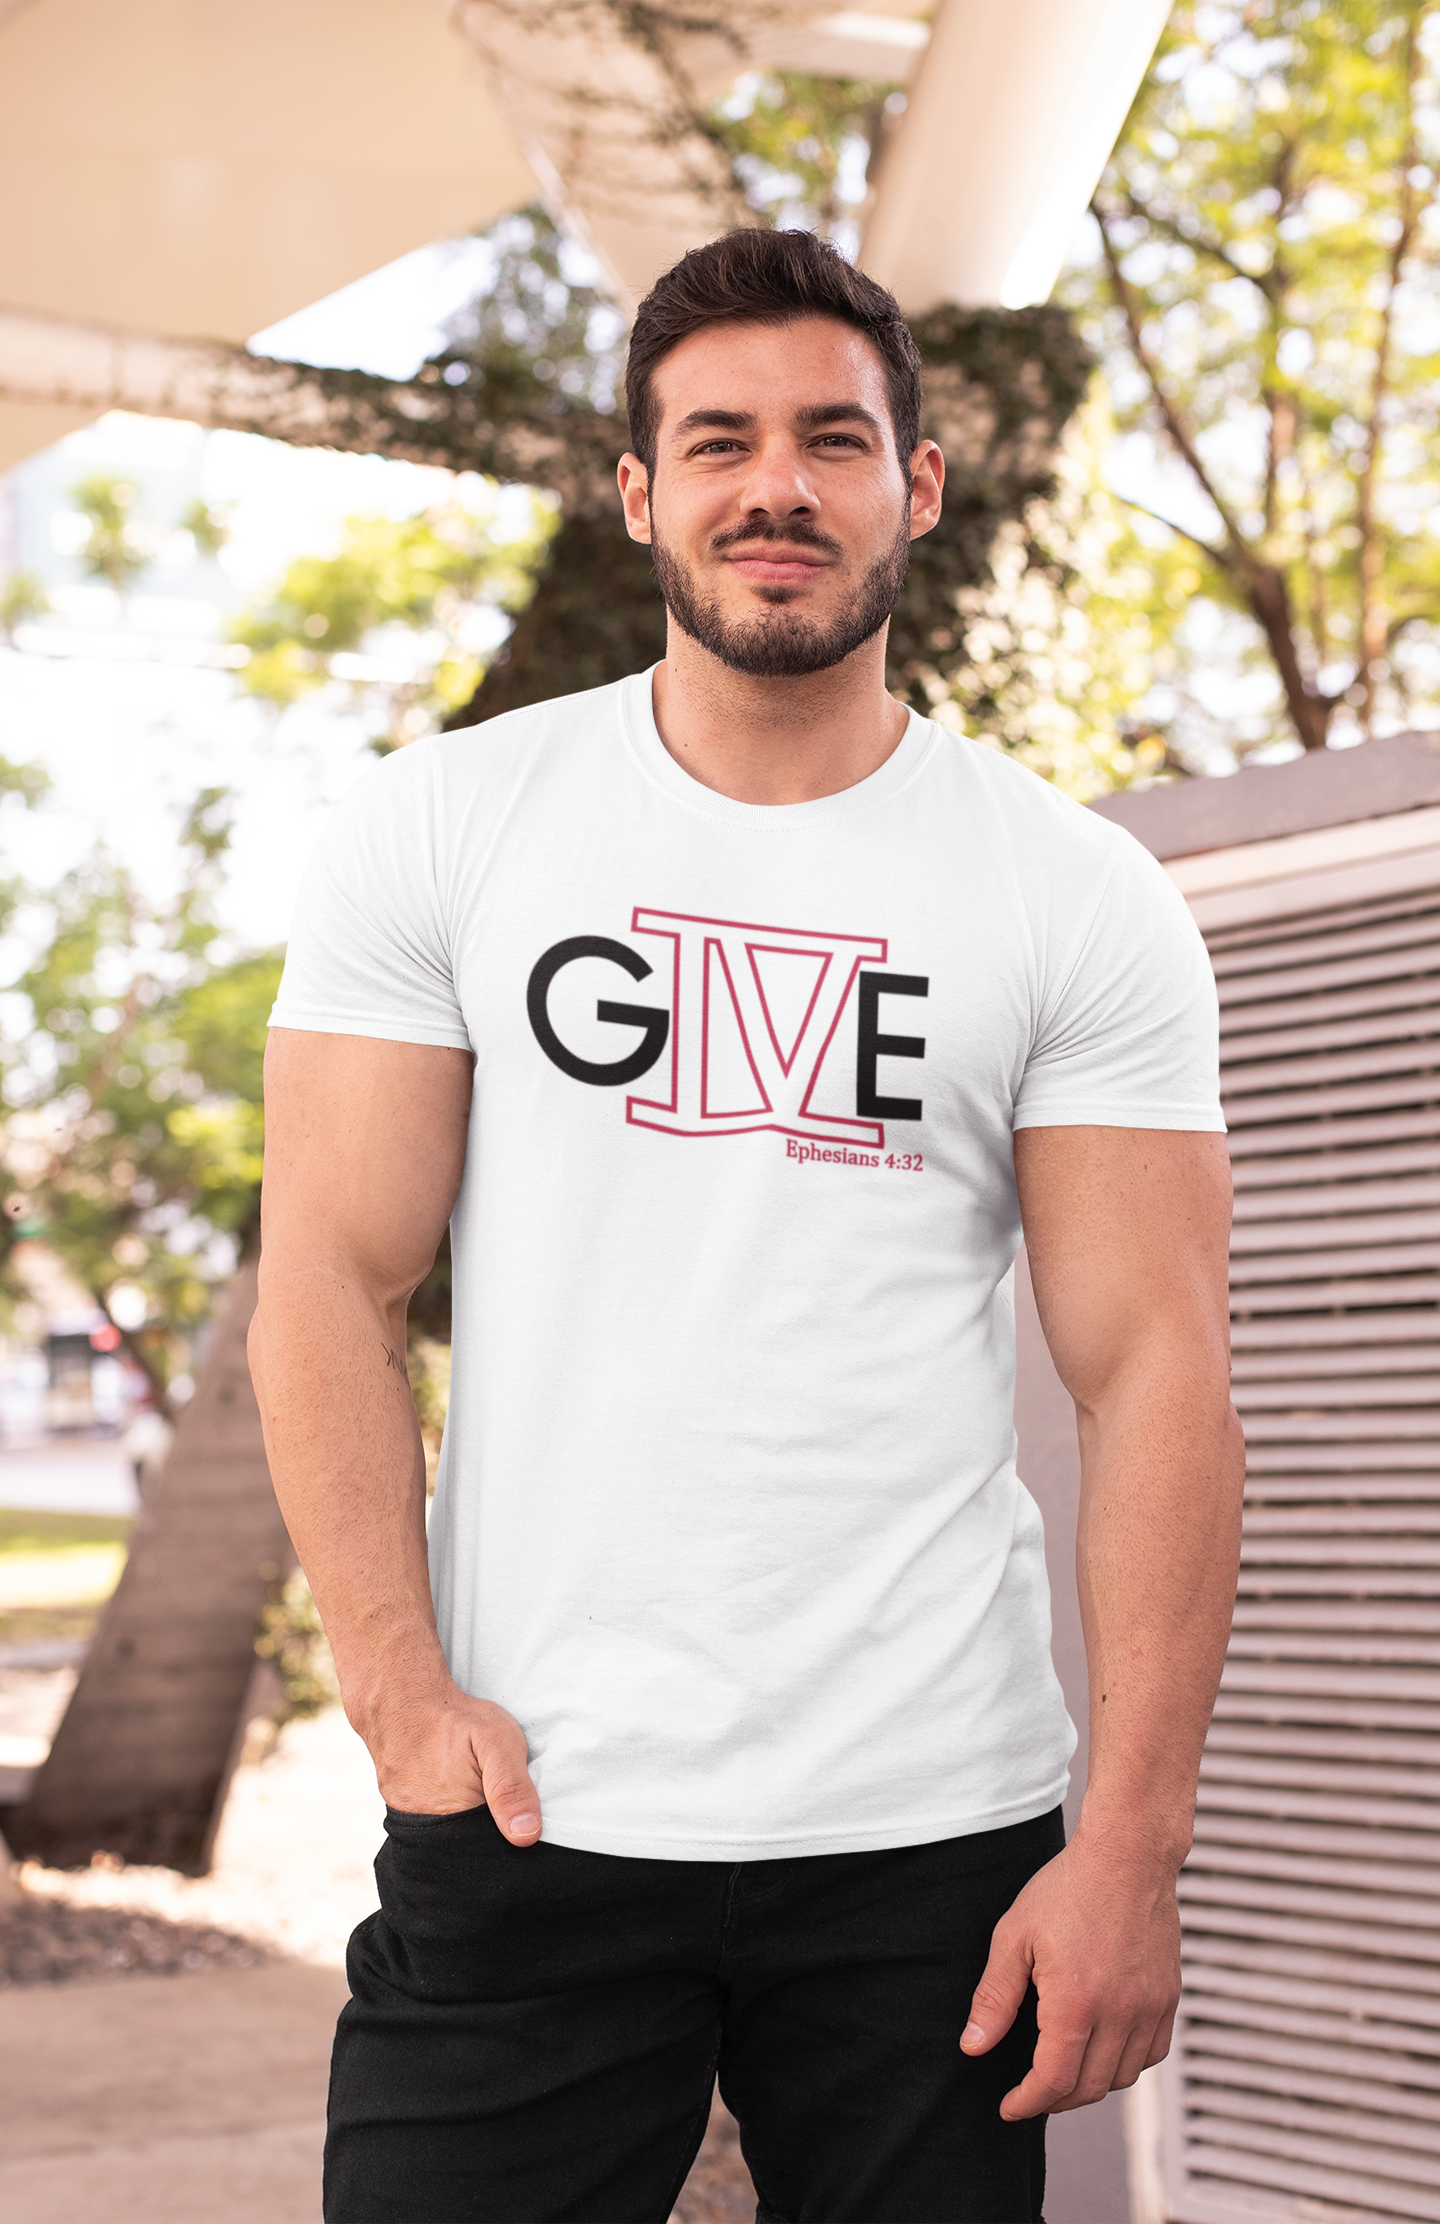 FOuRGIVE T-Shirt